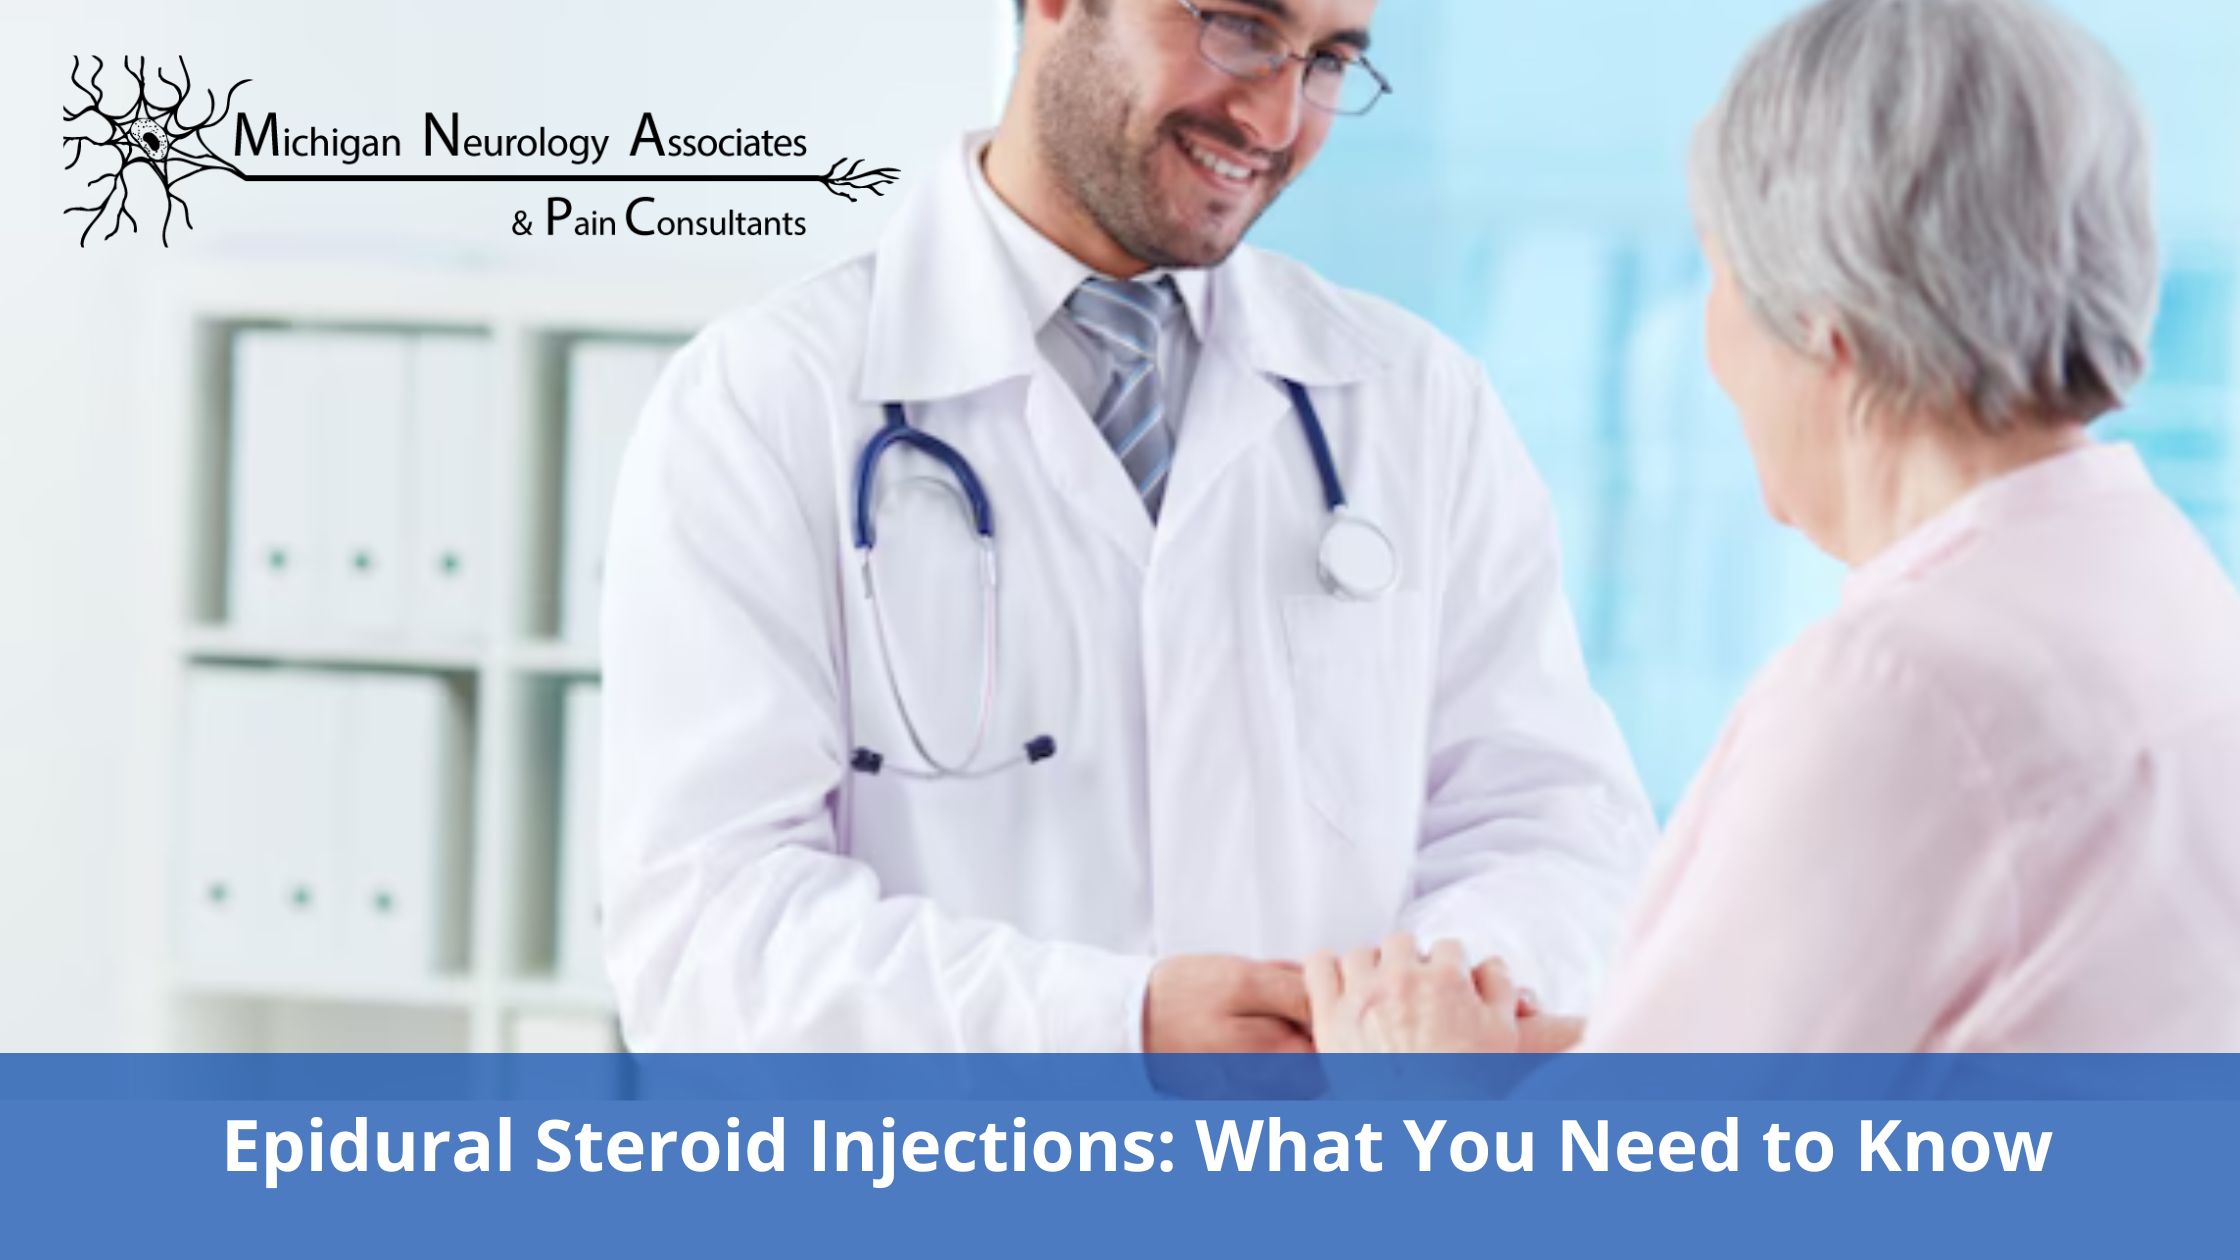 Epidural Steroid Injections: What You Need to Know